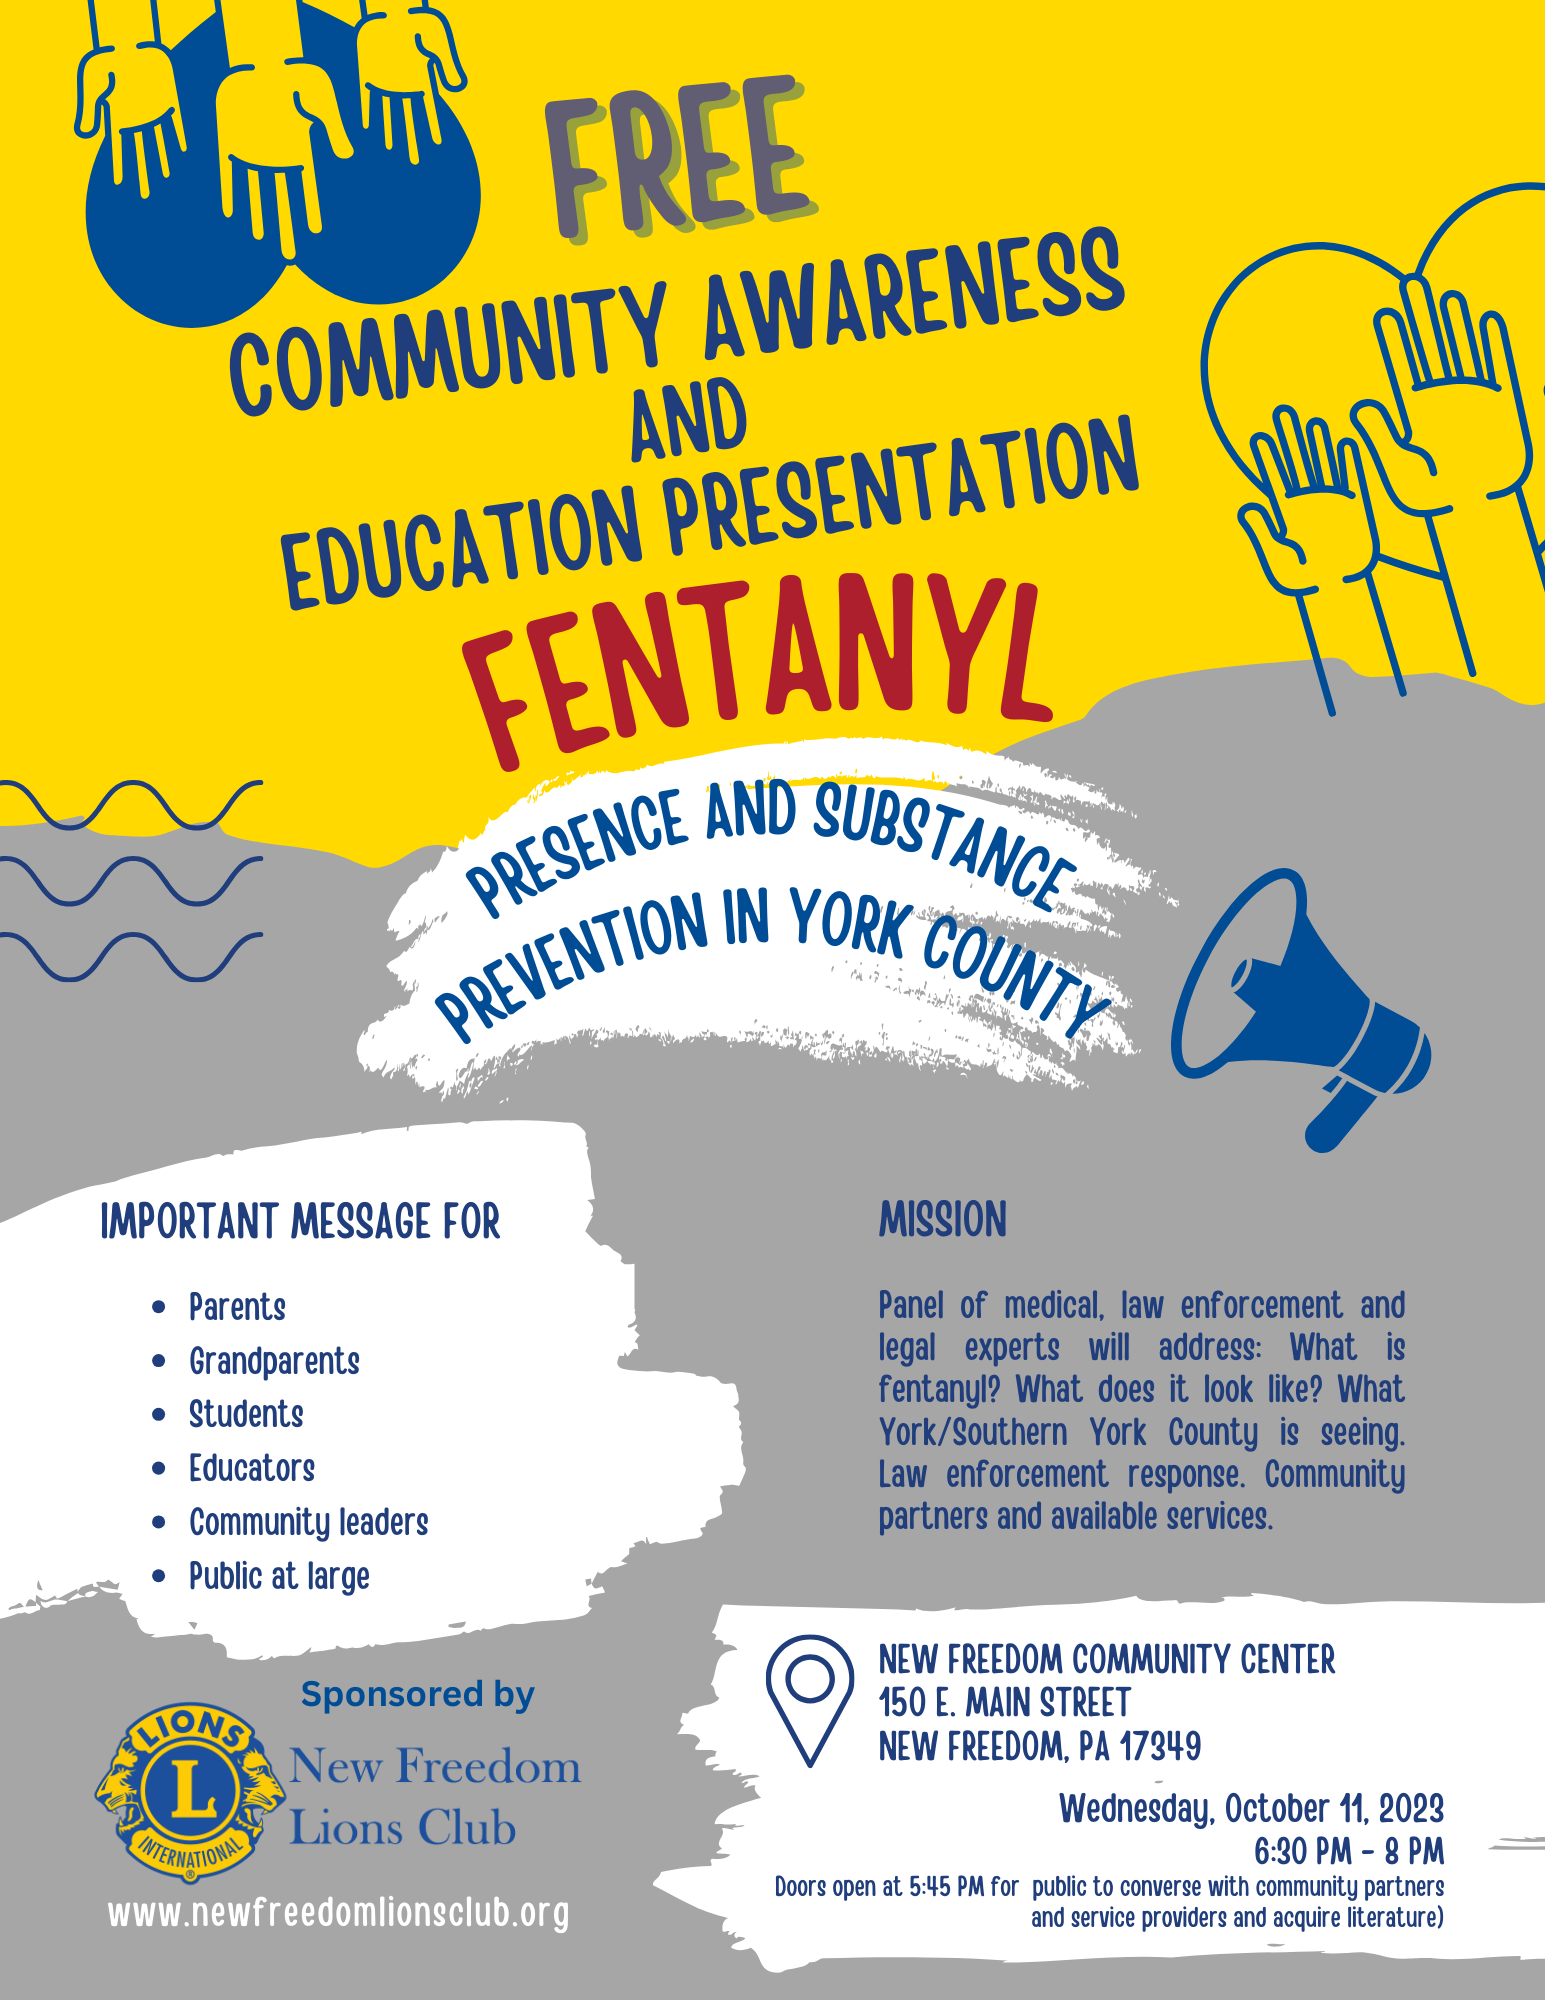 Fentanyl Awareness and Education